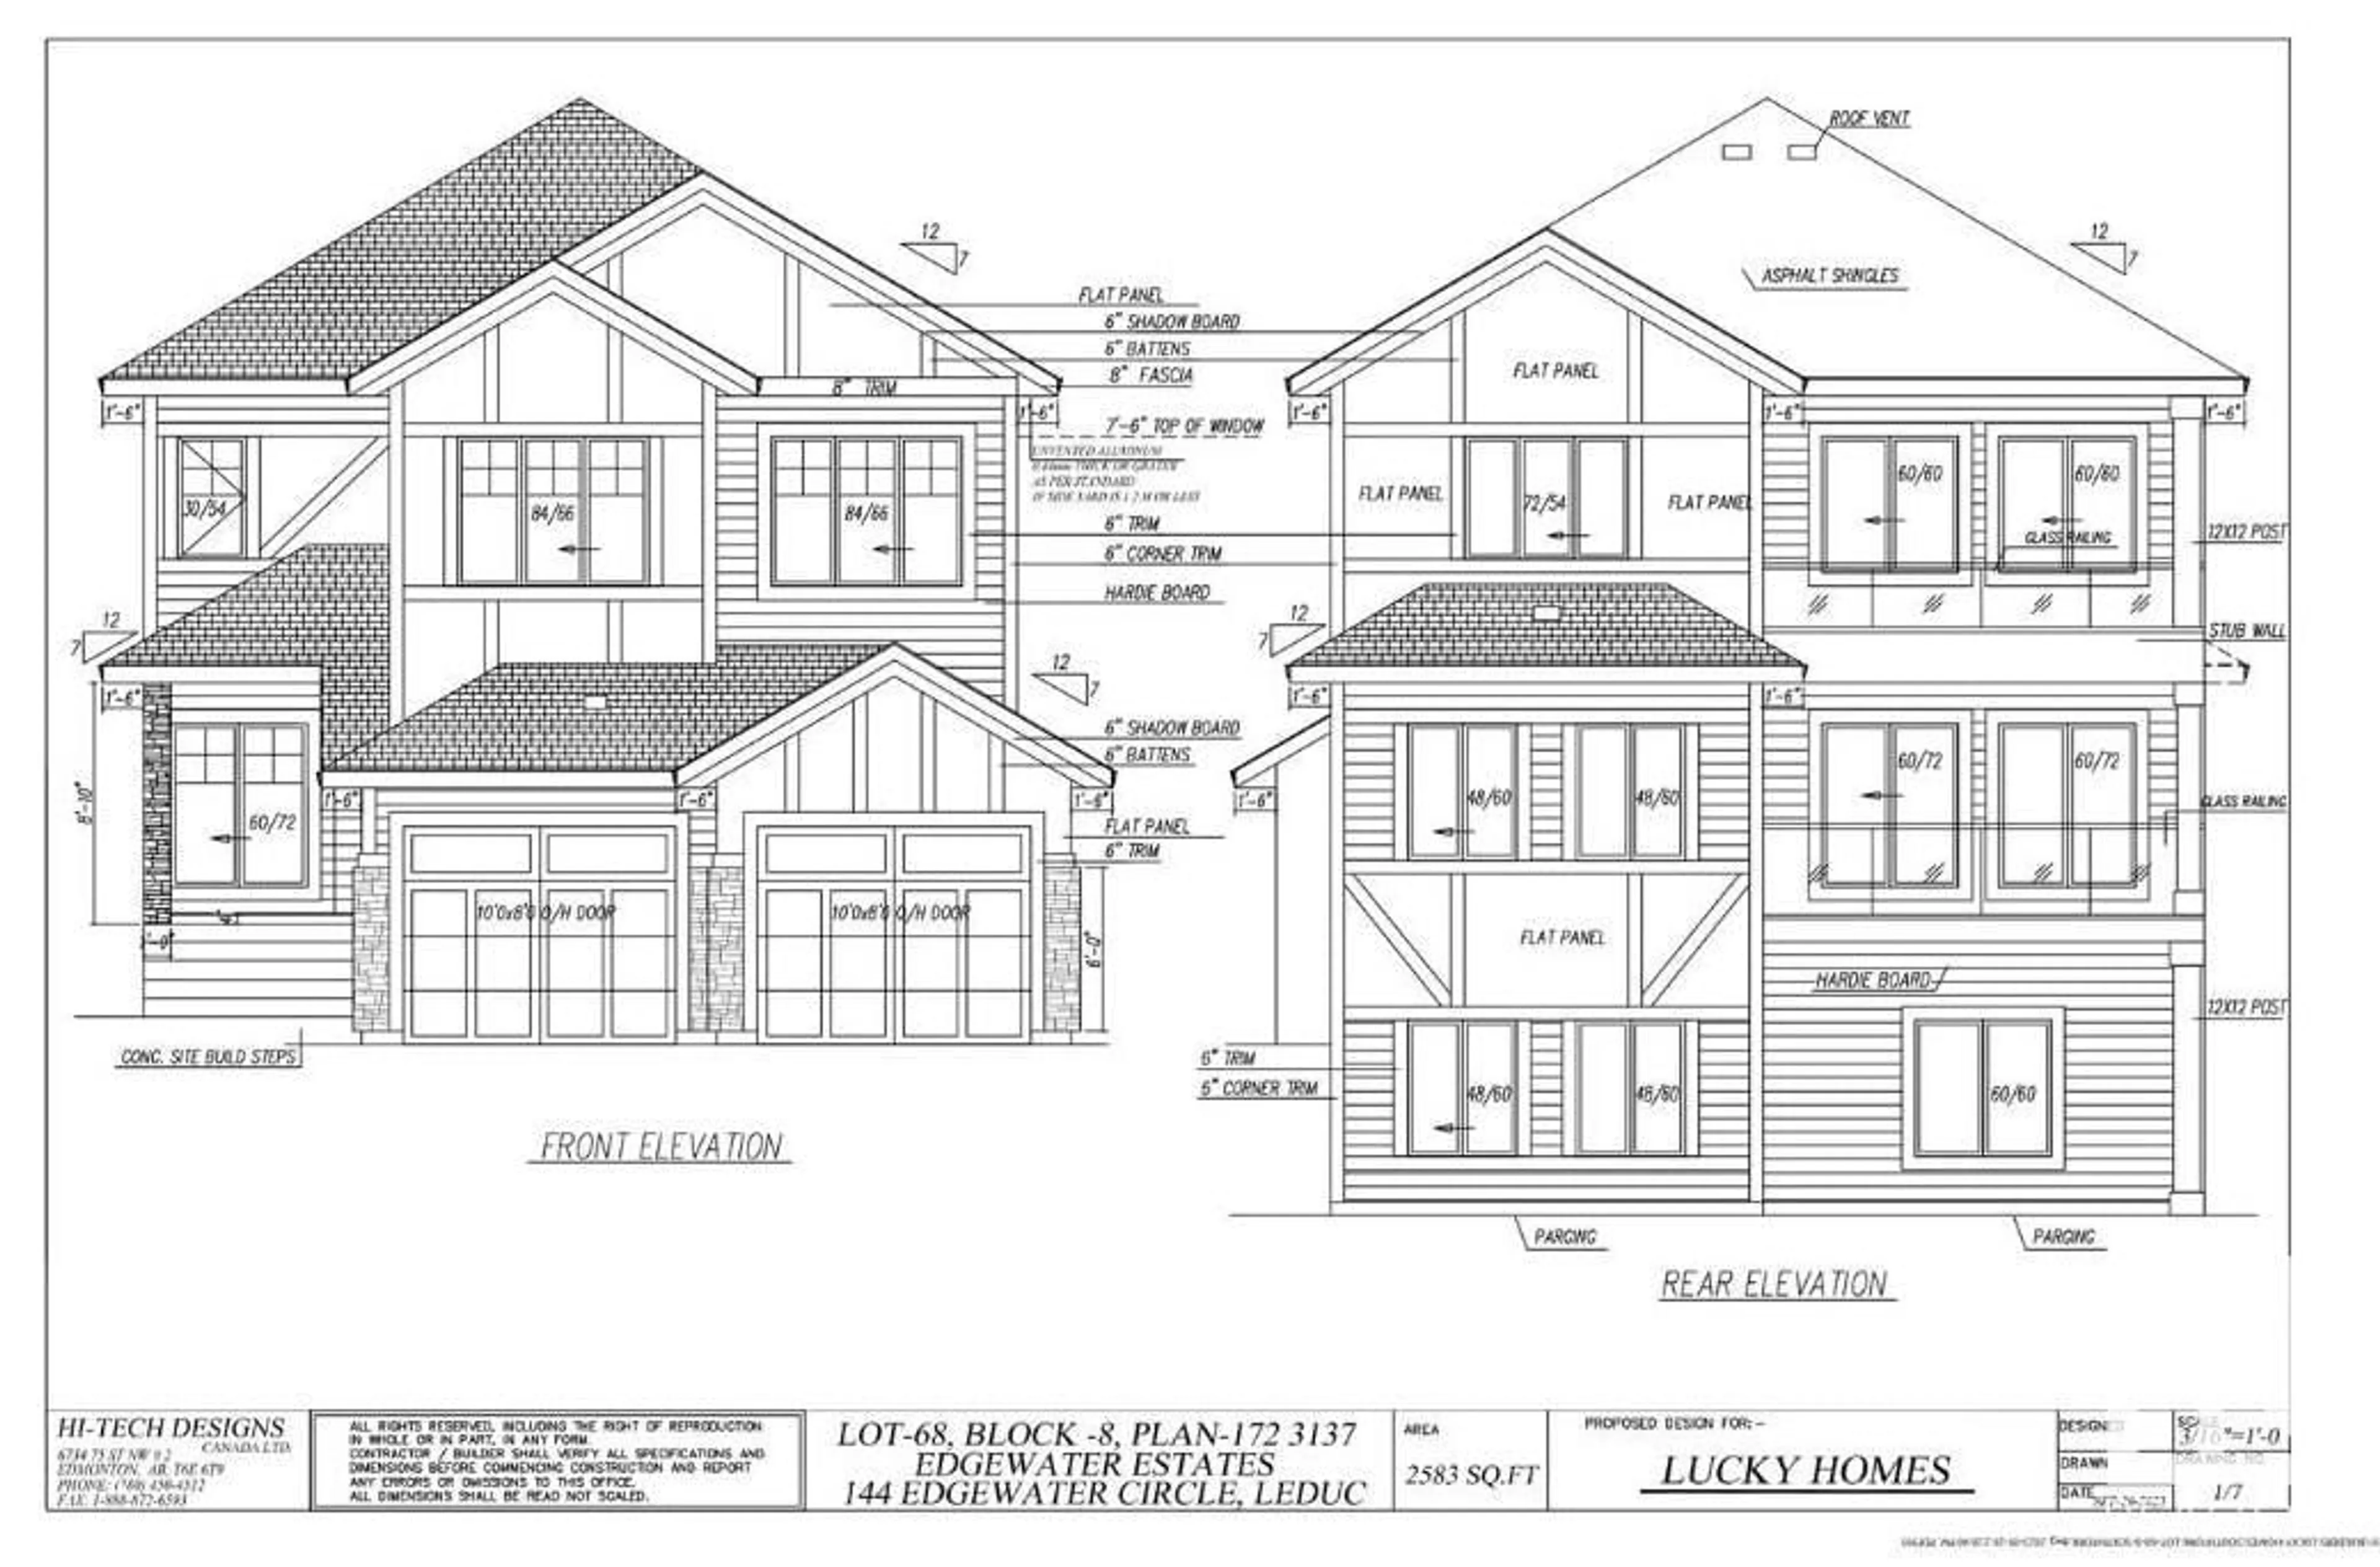 Frontside or backside of a home for 144 EDGEWATER CI, Leduc Alberta T9E1K5